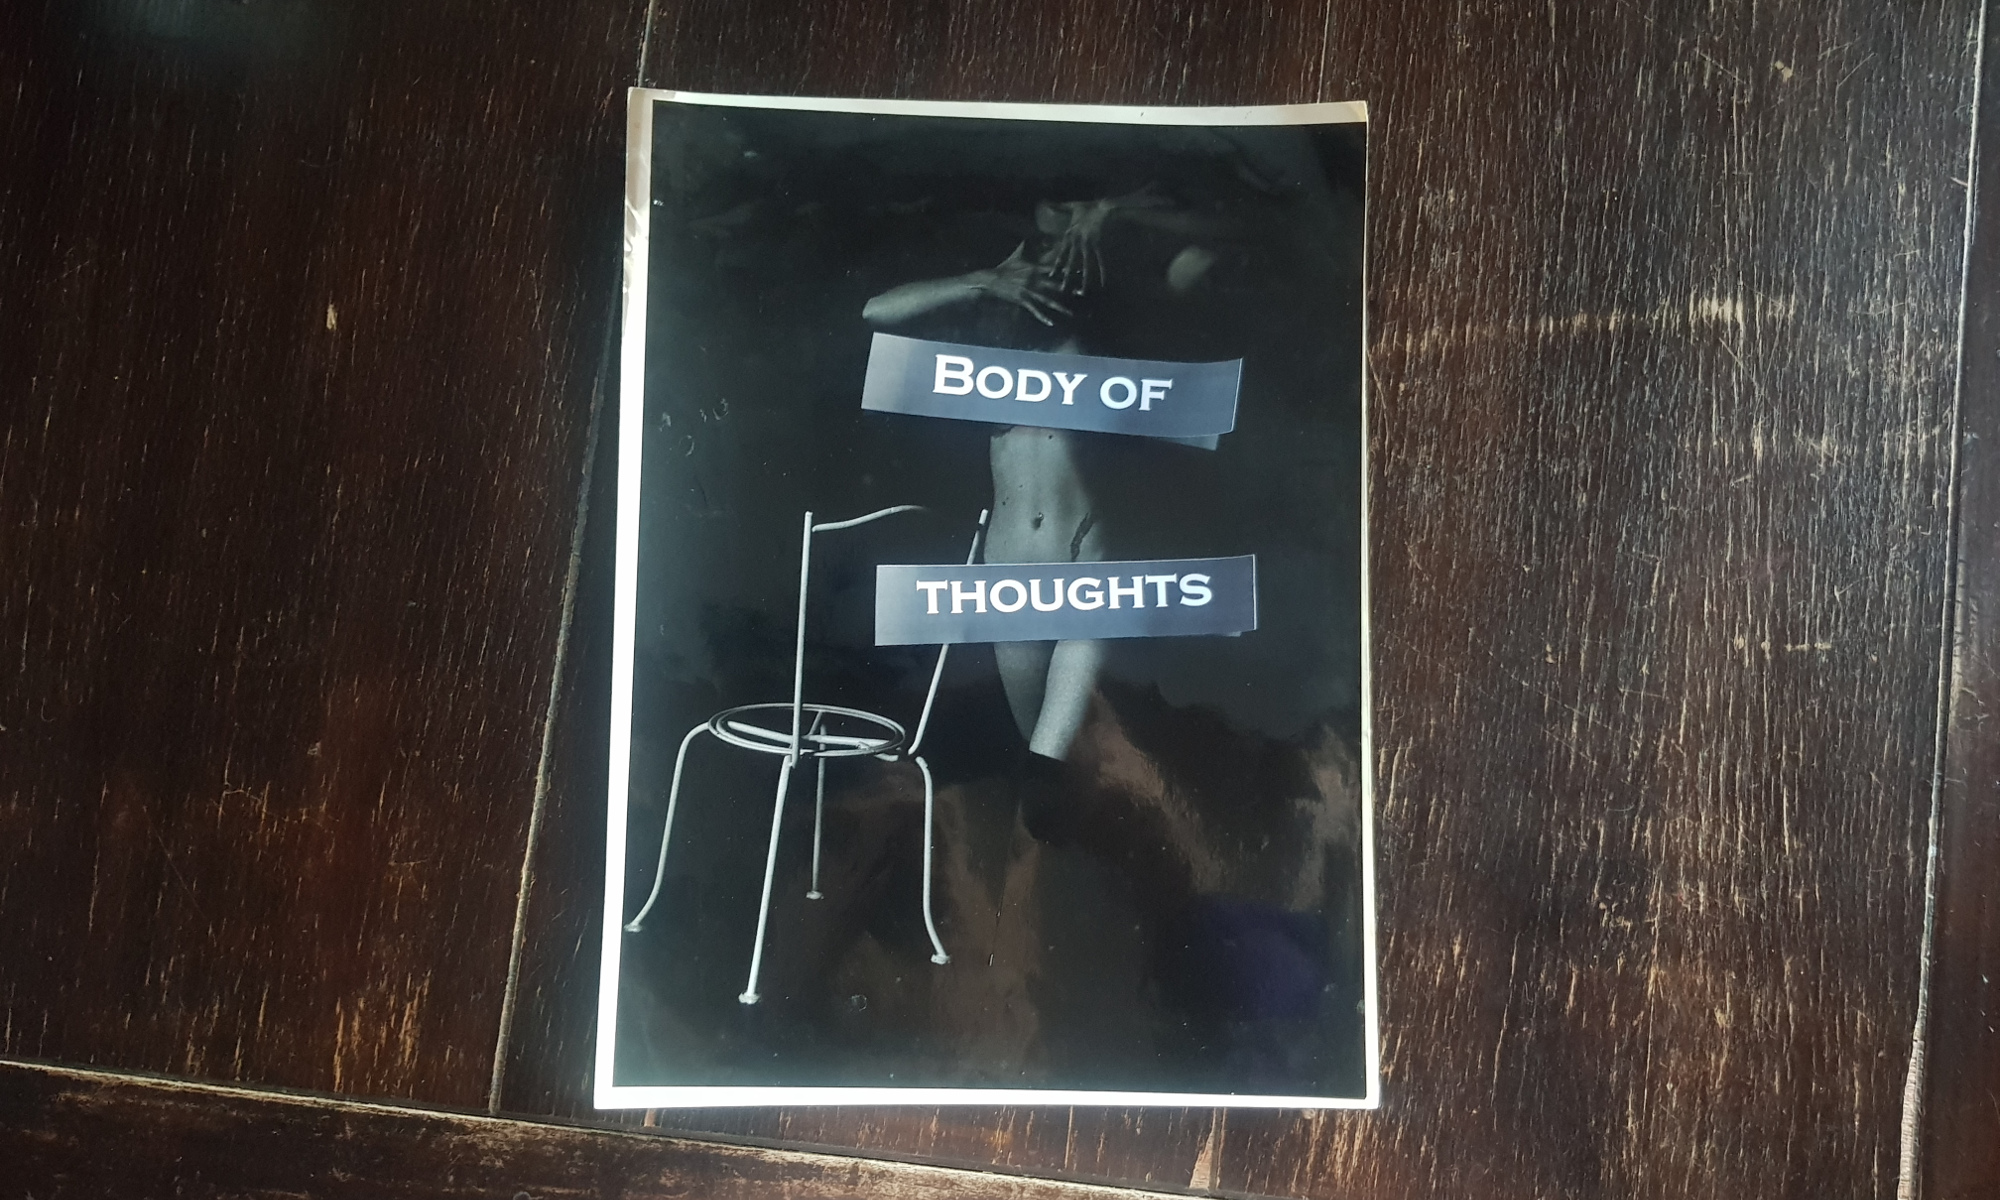 Body of thoughts